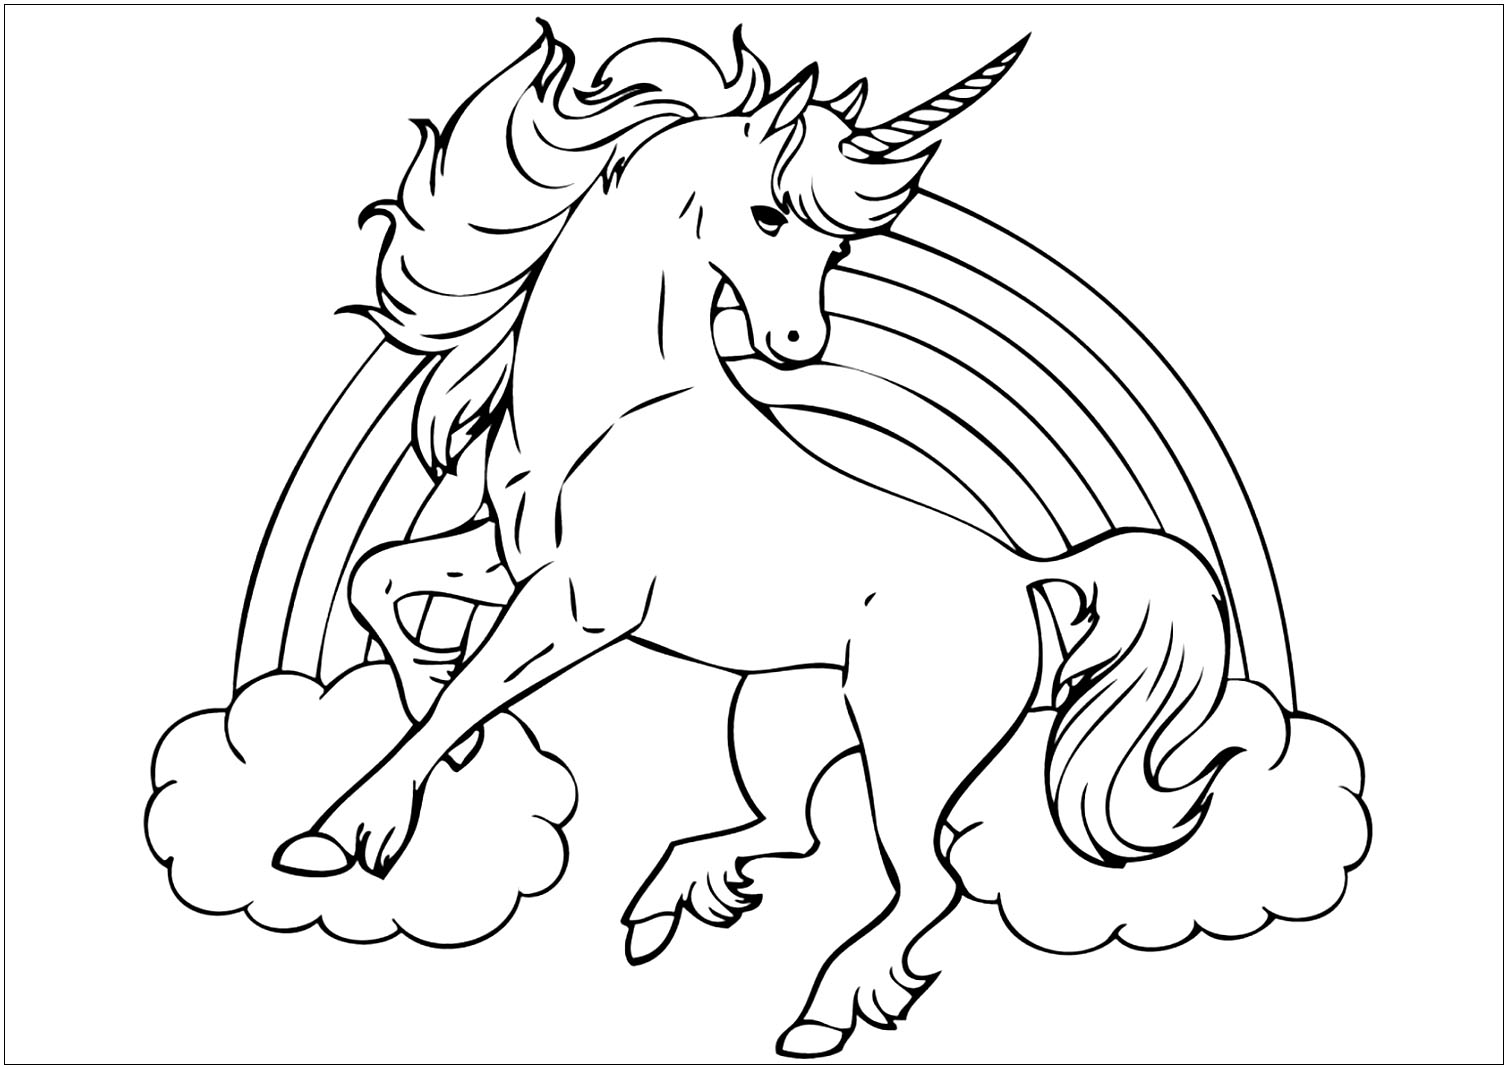 Unicorn Coloring Pages To Print Unicorns Kids Coloring Pages